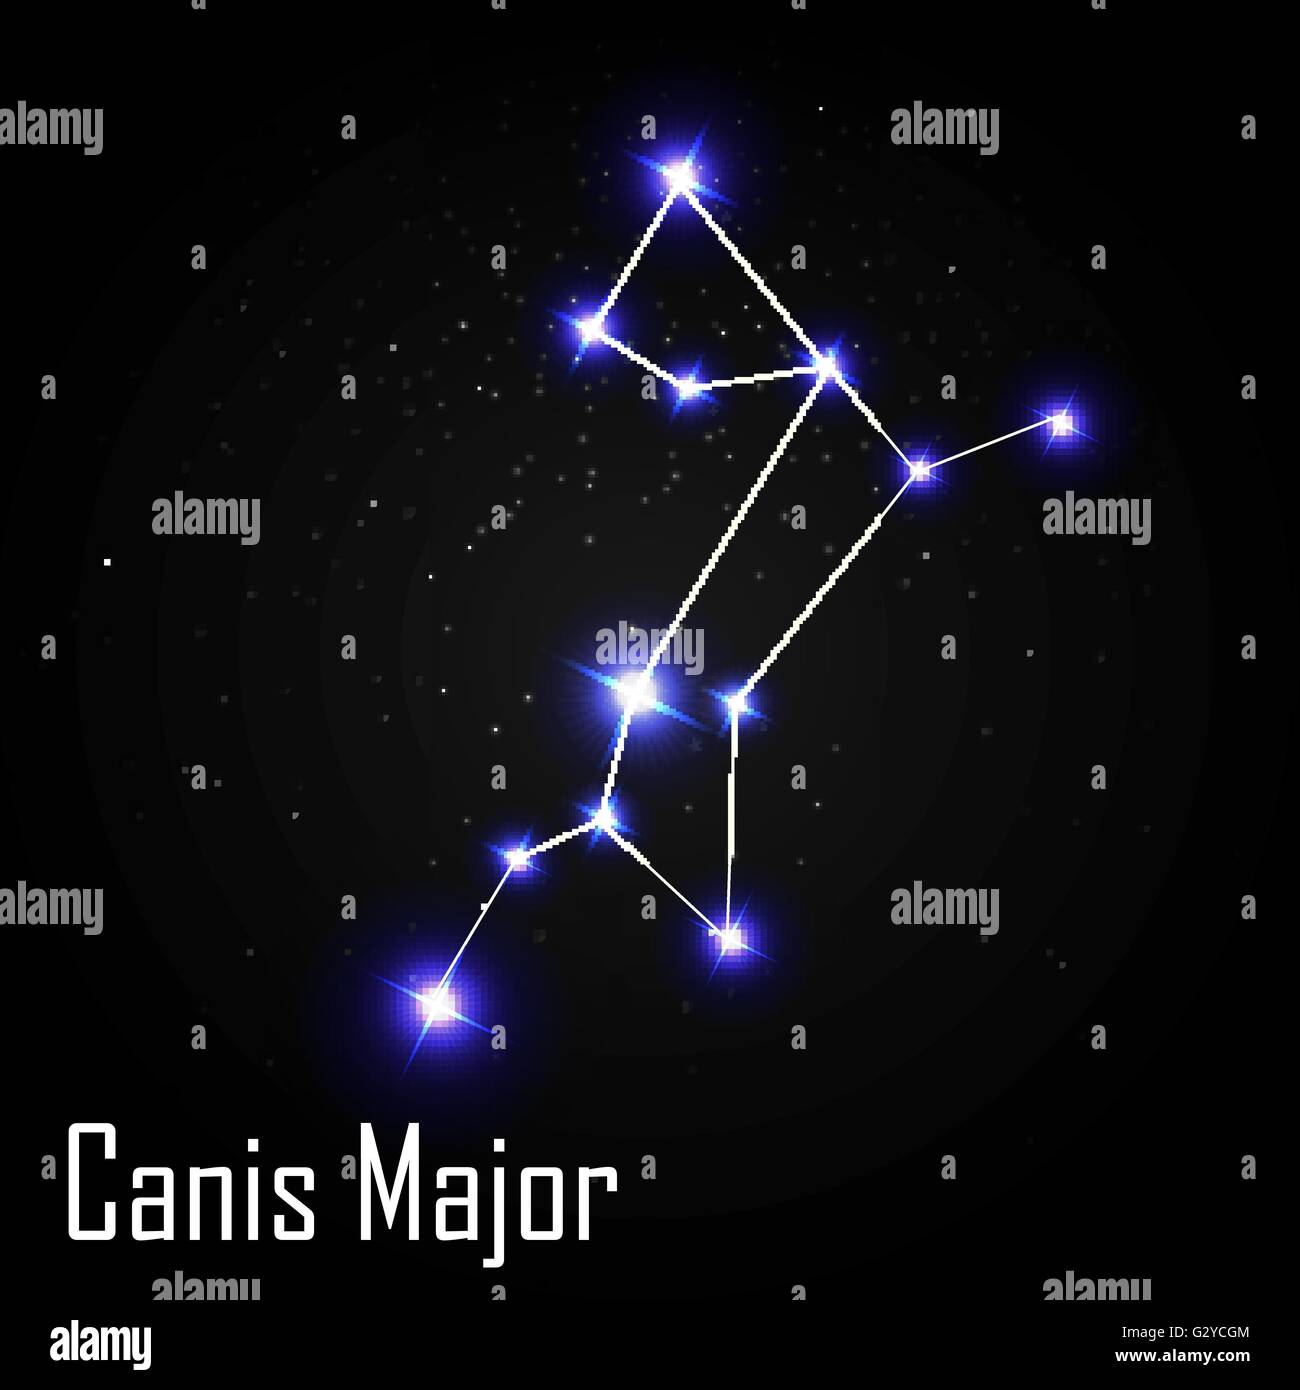 Vector Illustration Of The Constellation Great Dog On A Starry Black Sky  Background Stock Illustration  Download Image Now  iStock